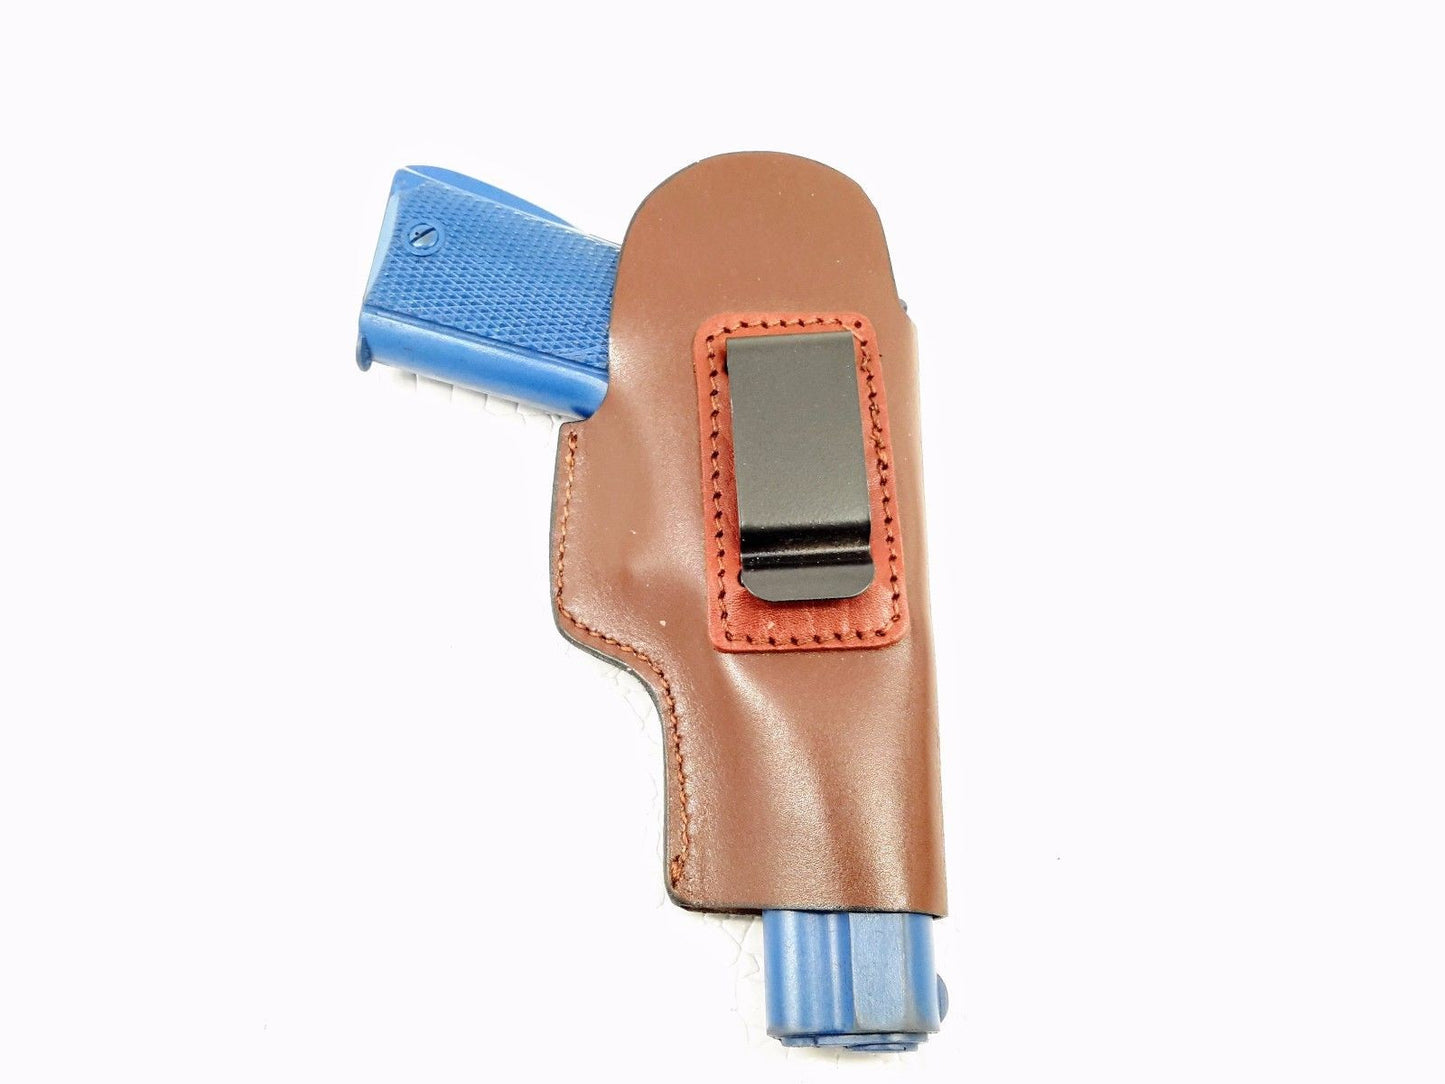 IWB Open Top Inside the Waistband Holster, Choose your Gun and Color